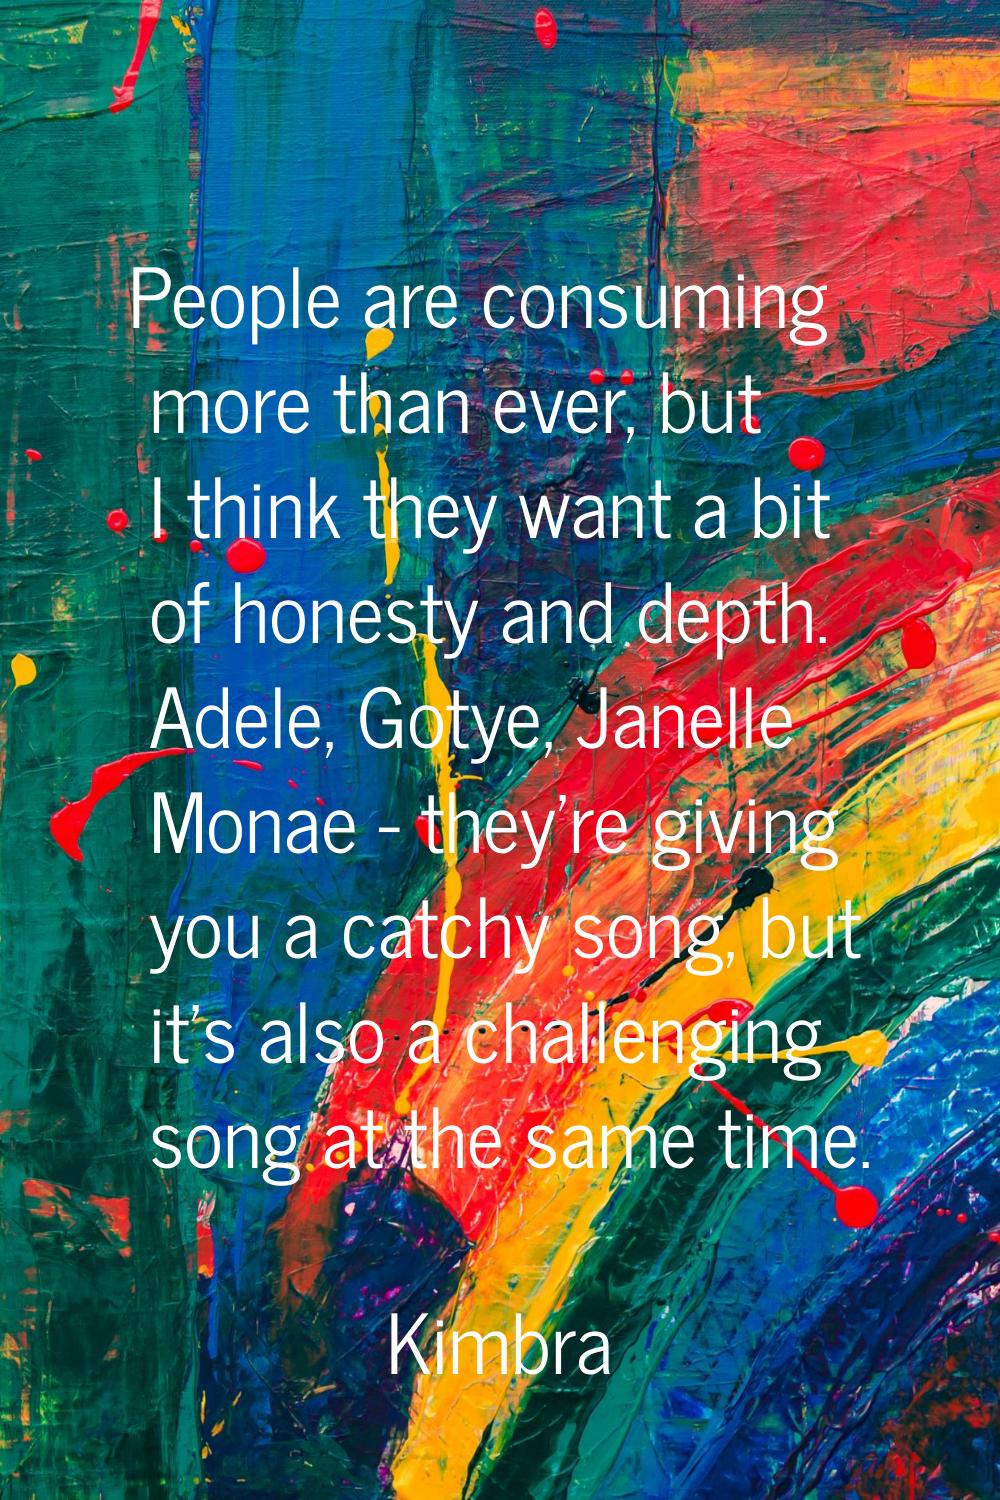 People are consuming more than ever, but I think they want a bit of honesty and depth. Adele, Gotye